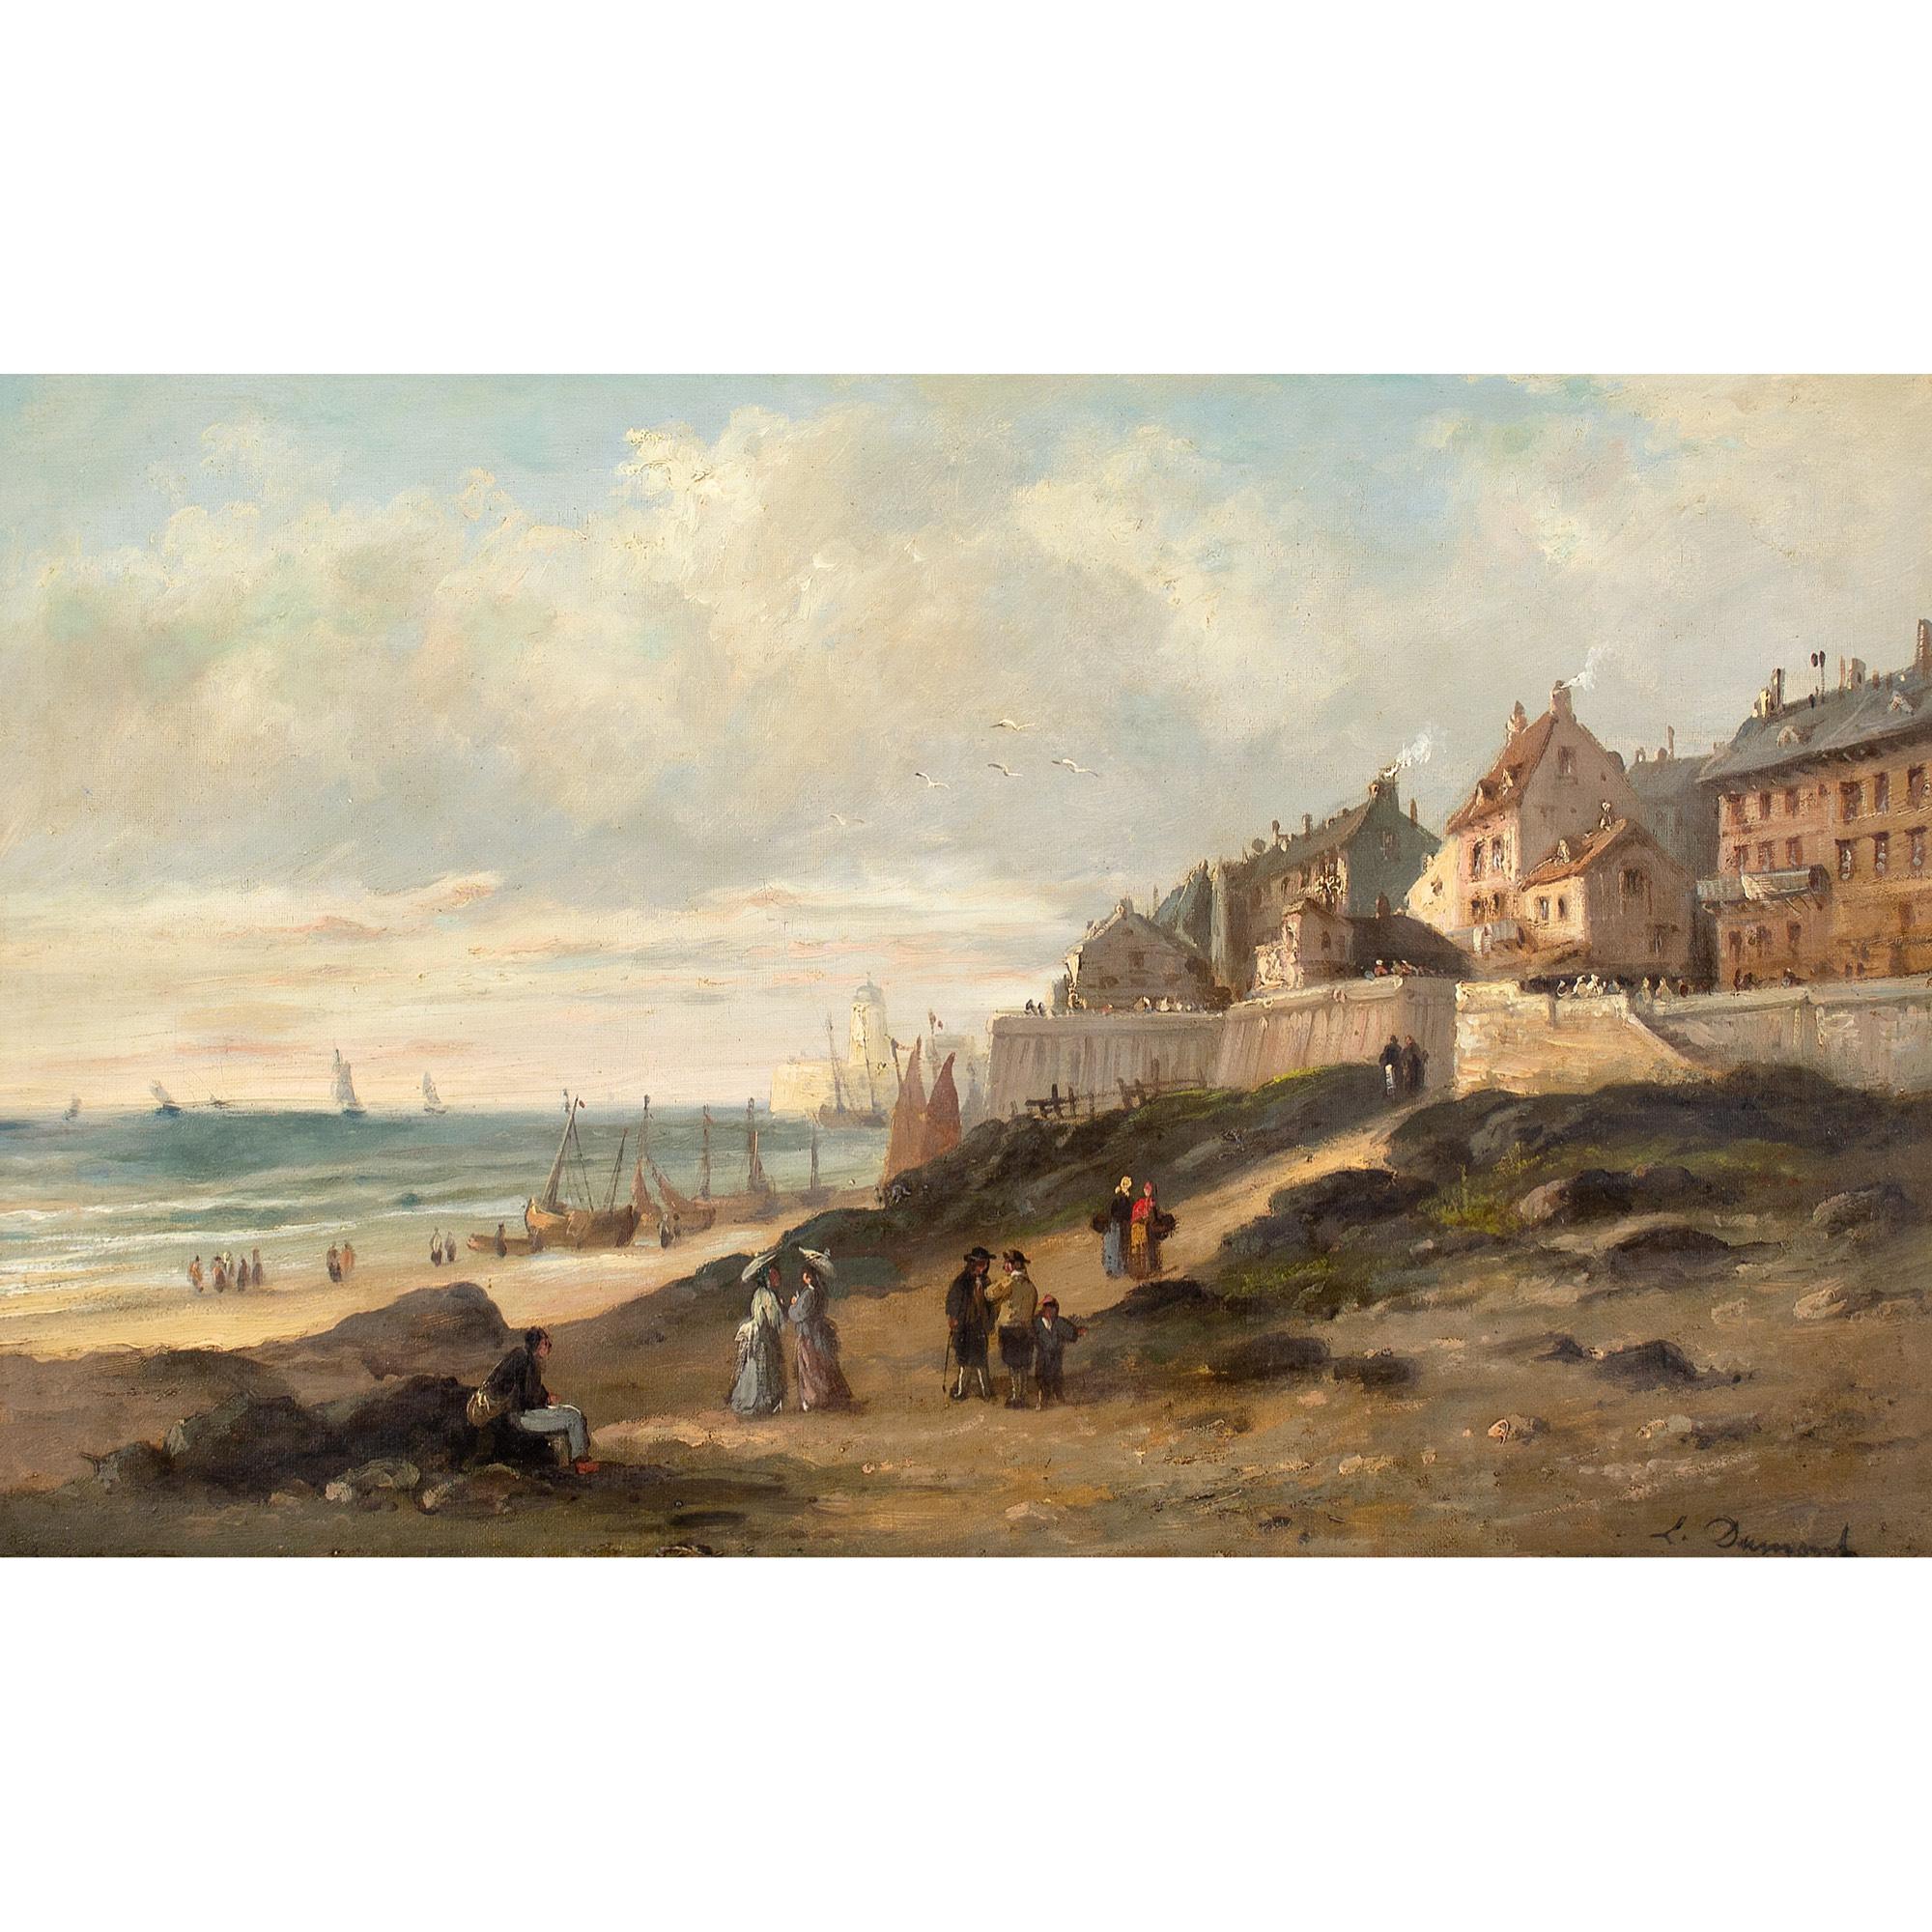 This mid-19th-century oil painting by French artist Louis Paul Pierre Dumont (1822-1885) depicts a coastal view with distant boats, figures and buildings. It’s reminiscent of Normandy.

The tempestuous sea, where full-rigged ships battle the